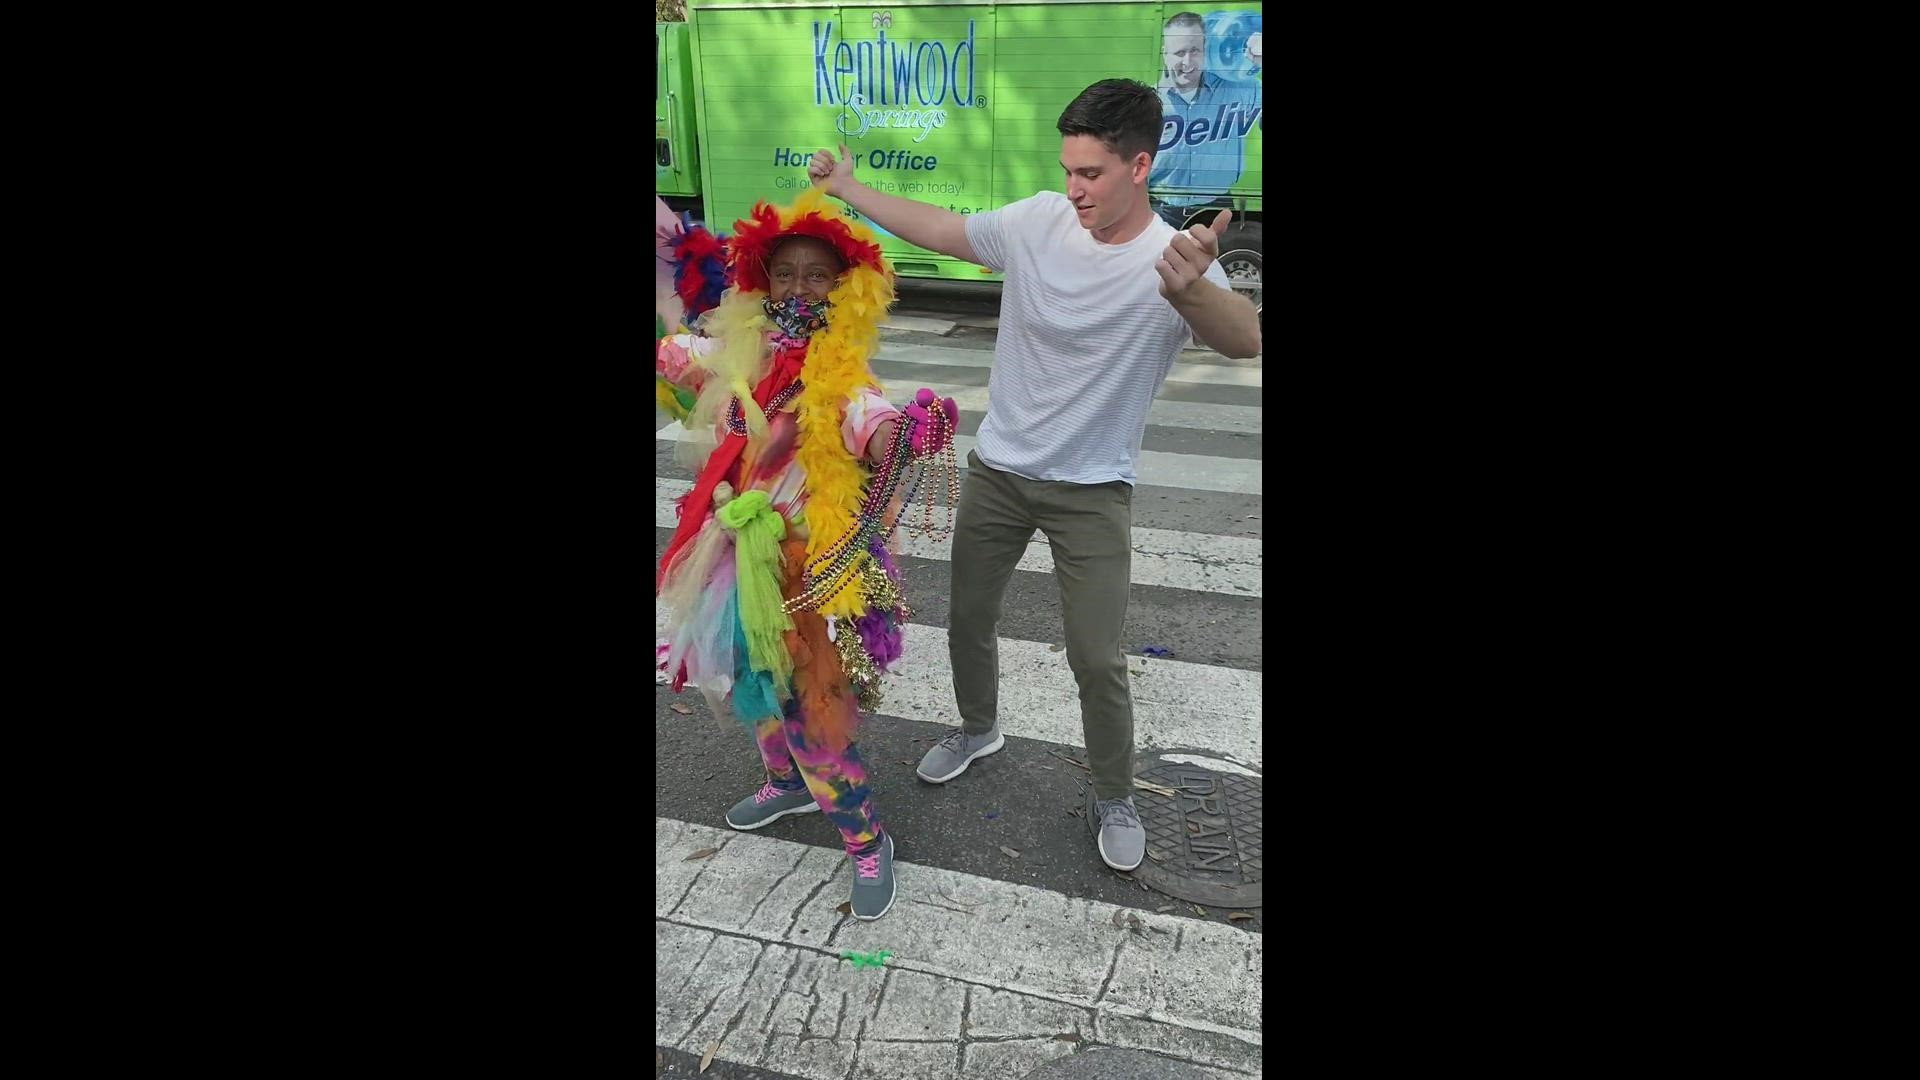 Dancing in New Orleans
Credit: Matt Lively - 6News